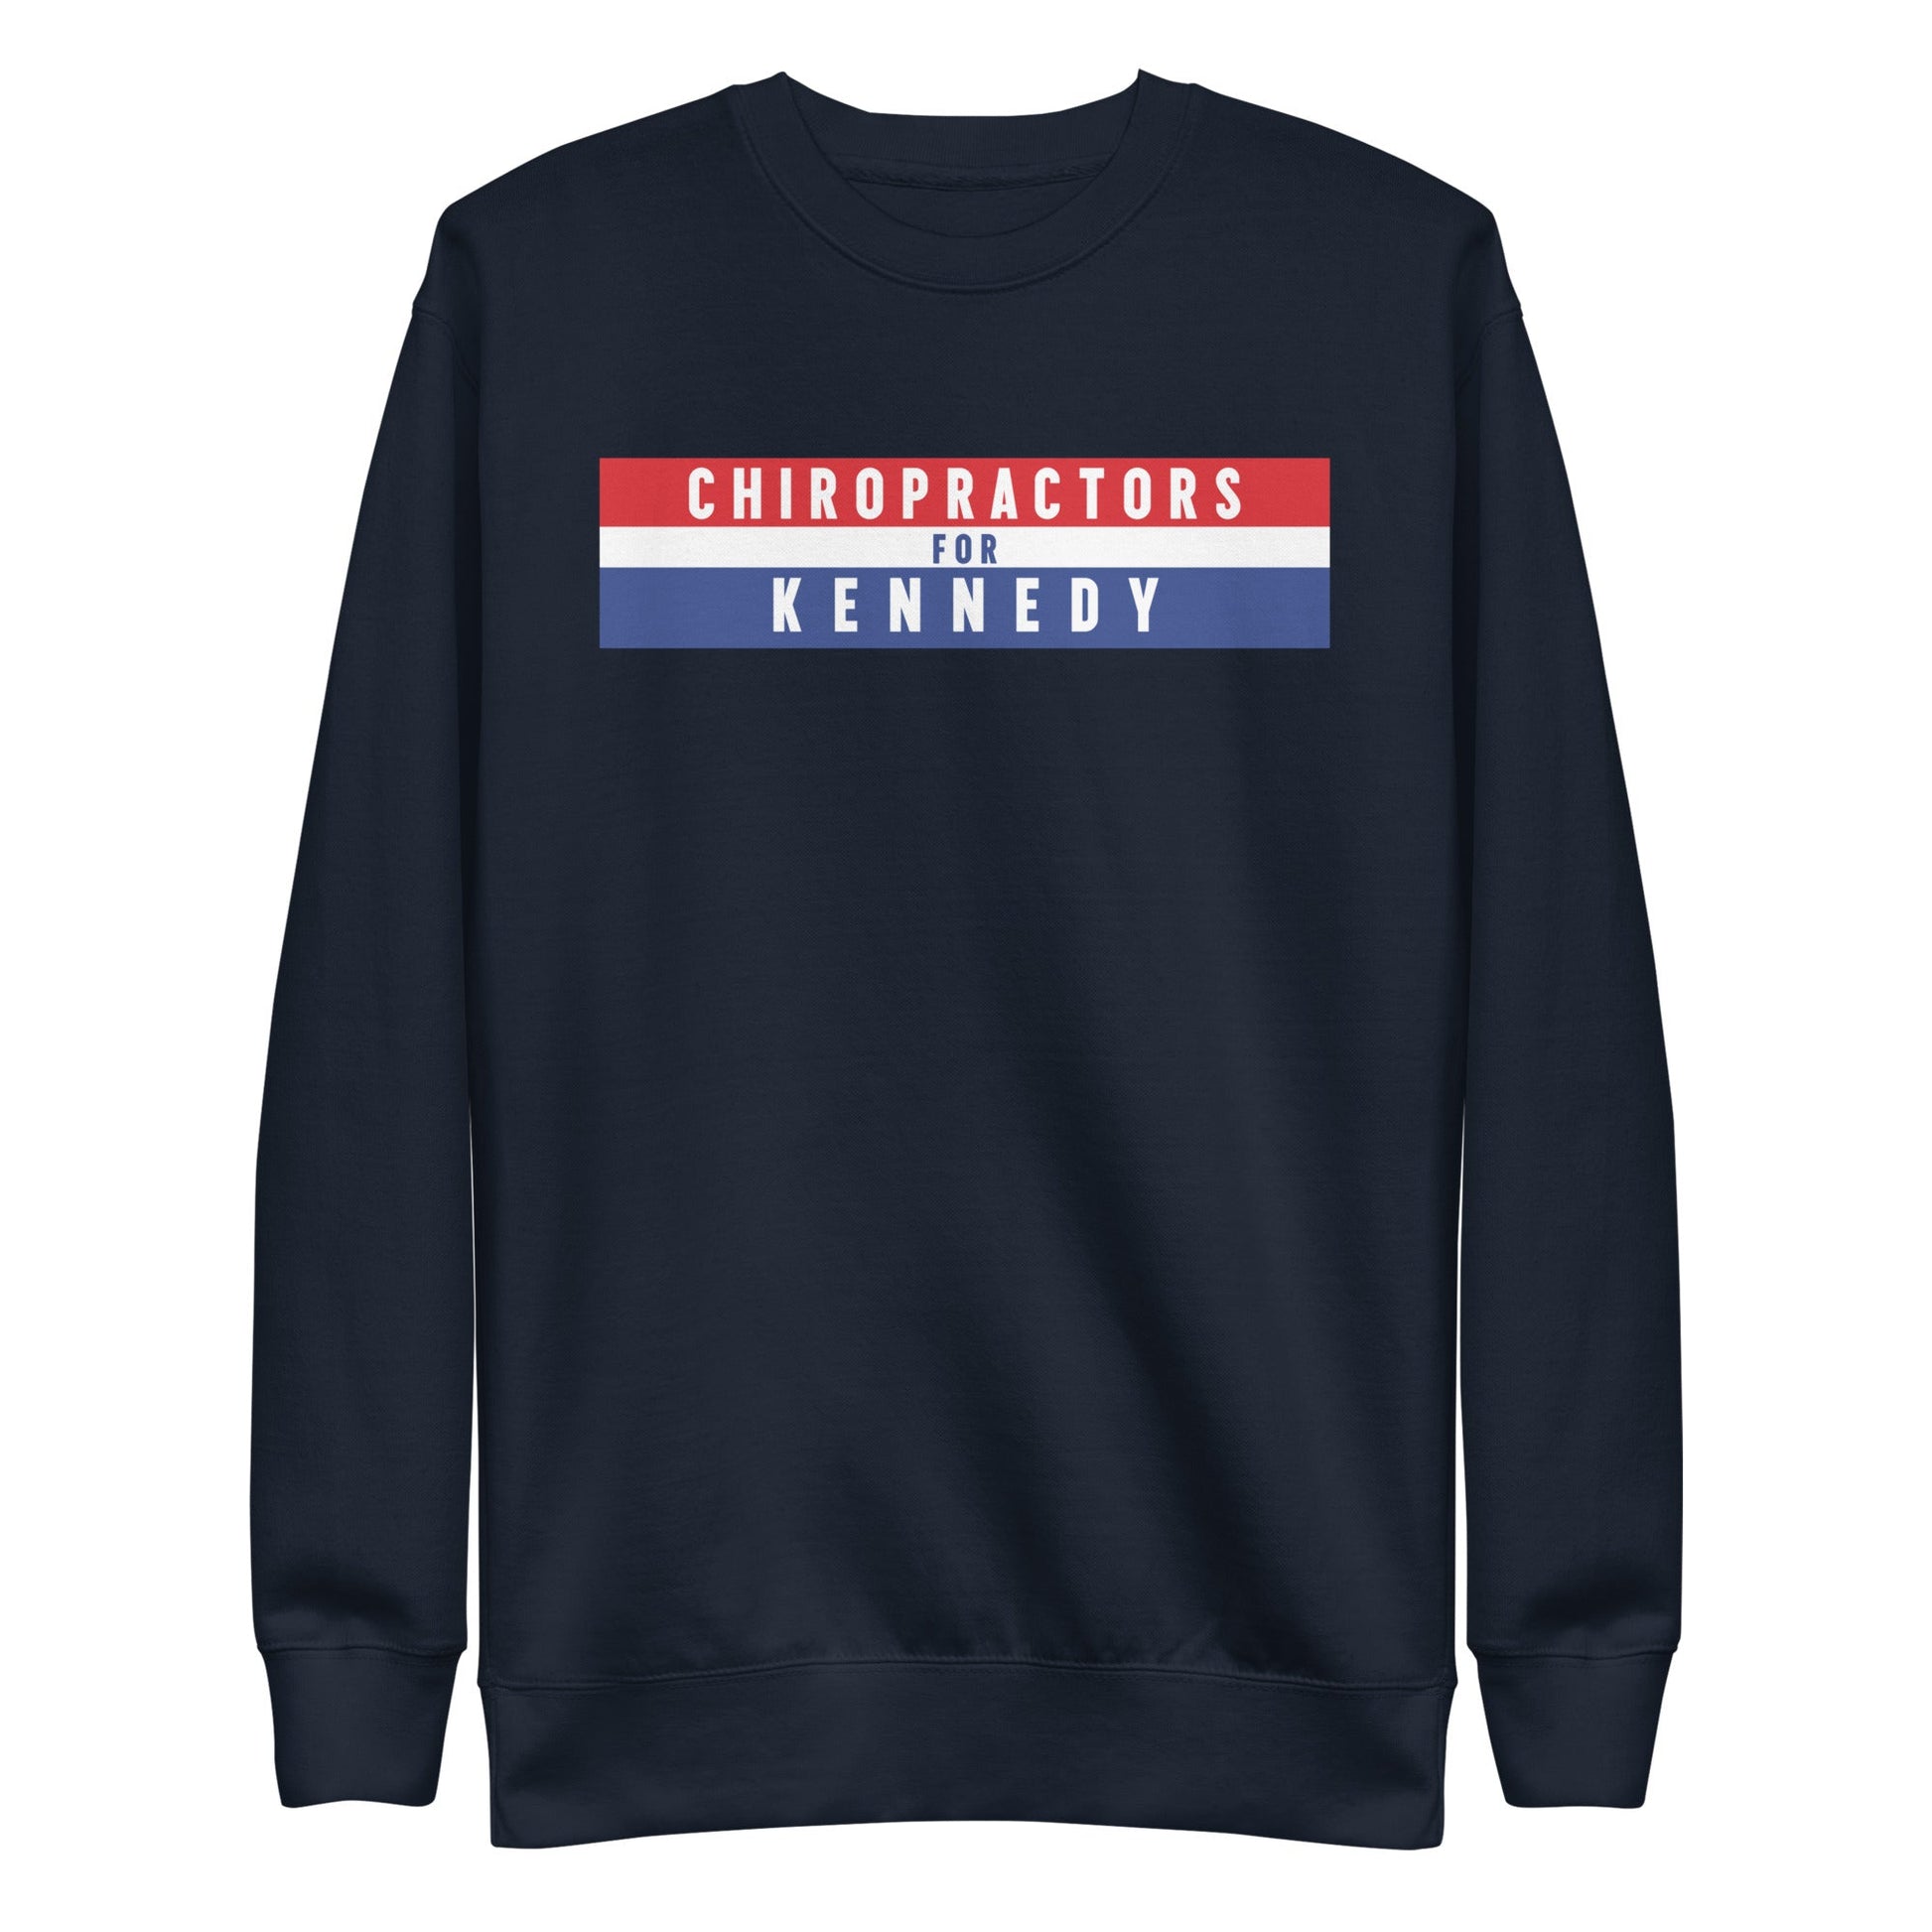 Chiropractors for Kennedy Unisex Sweatshirt - TEAM KENNEDY. All rights reserved